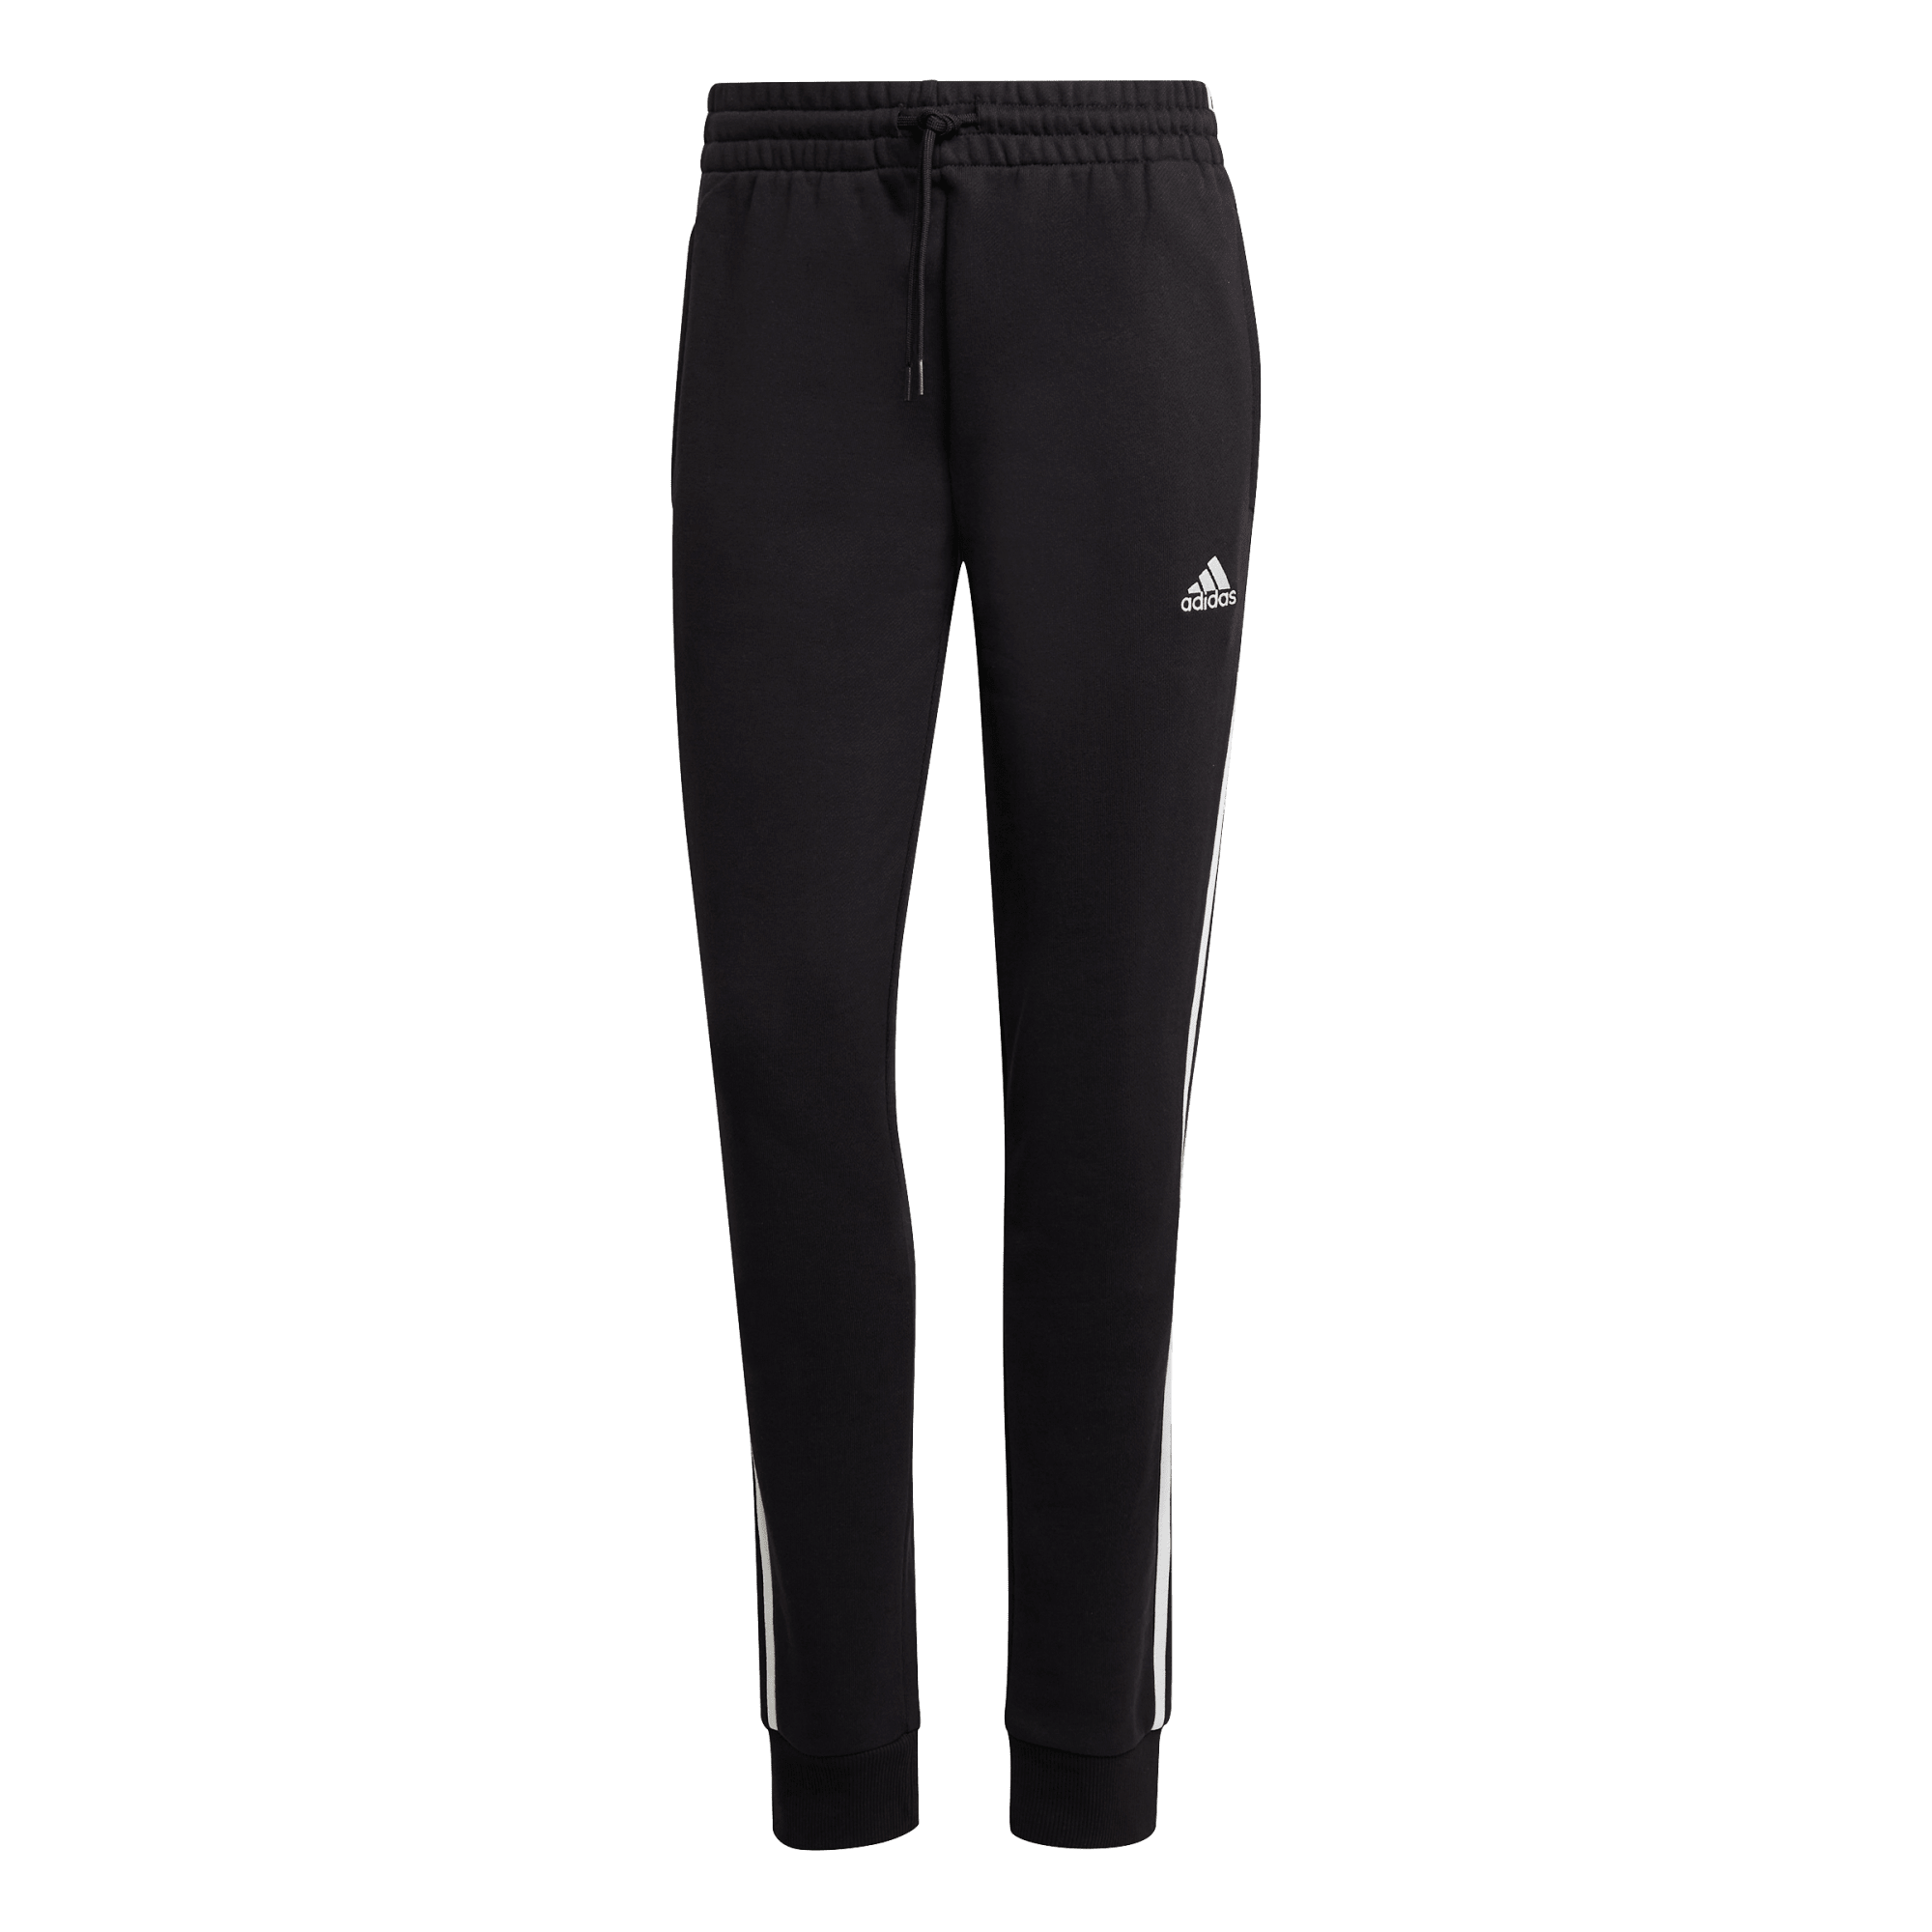 Women's 3-Stripes French Terry Cuffed Pant from adidas